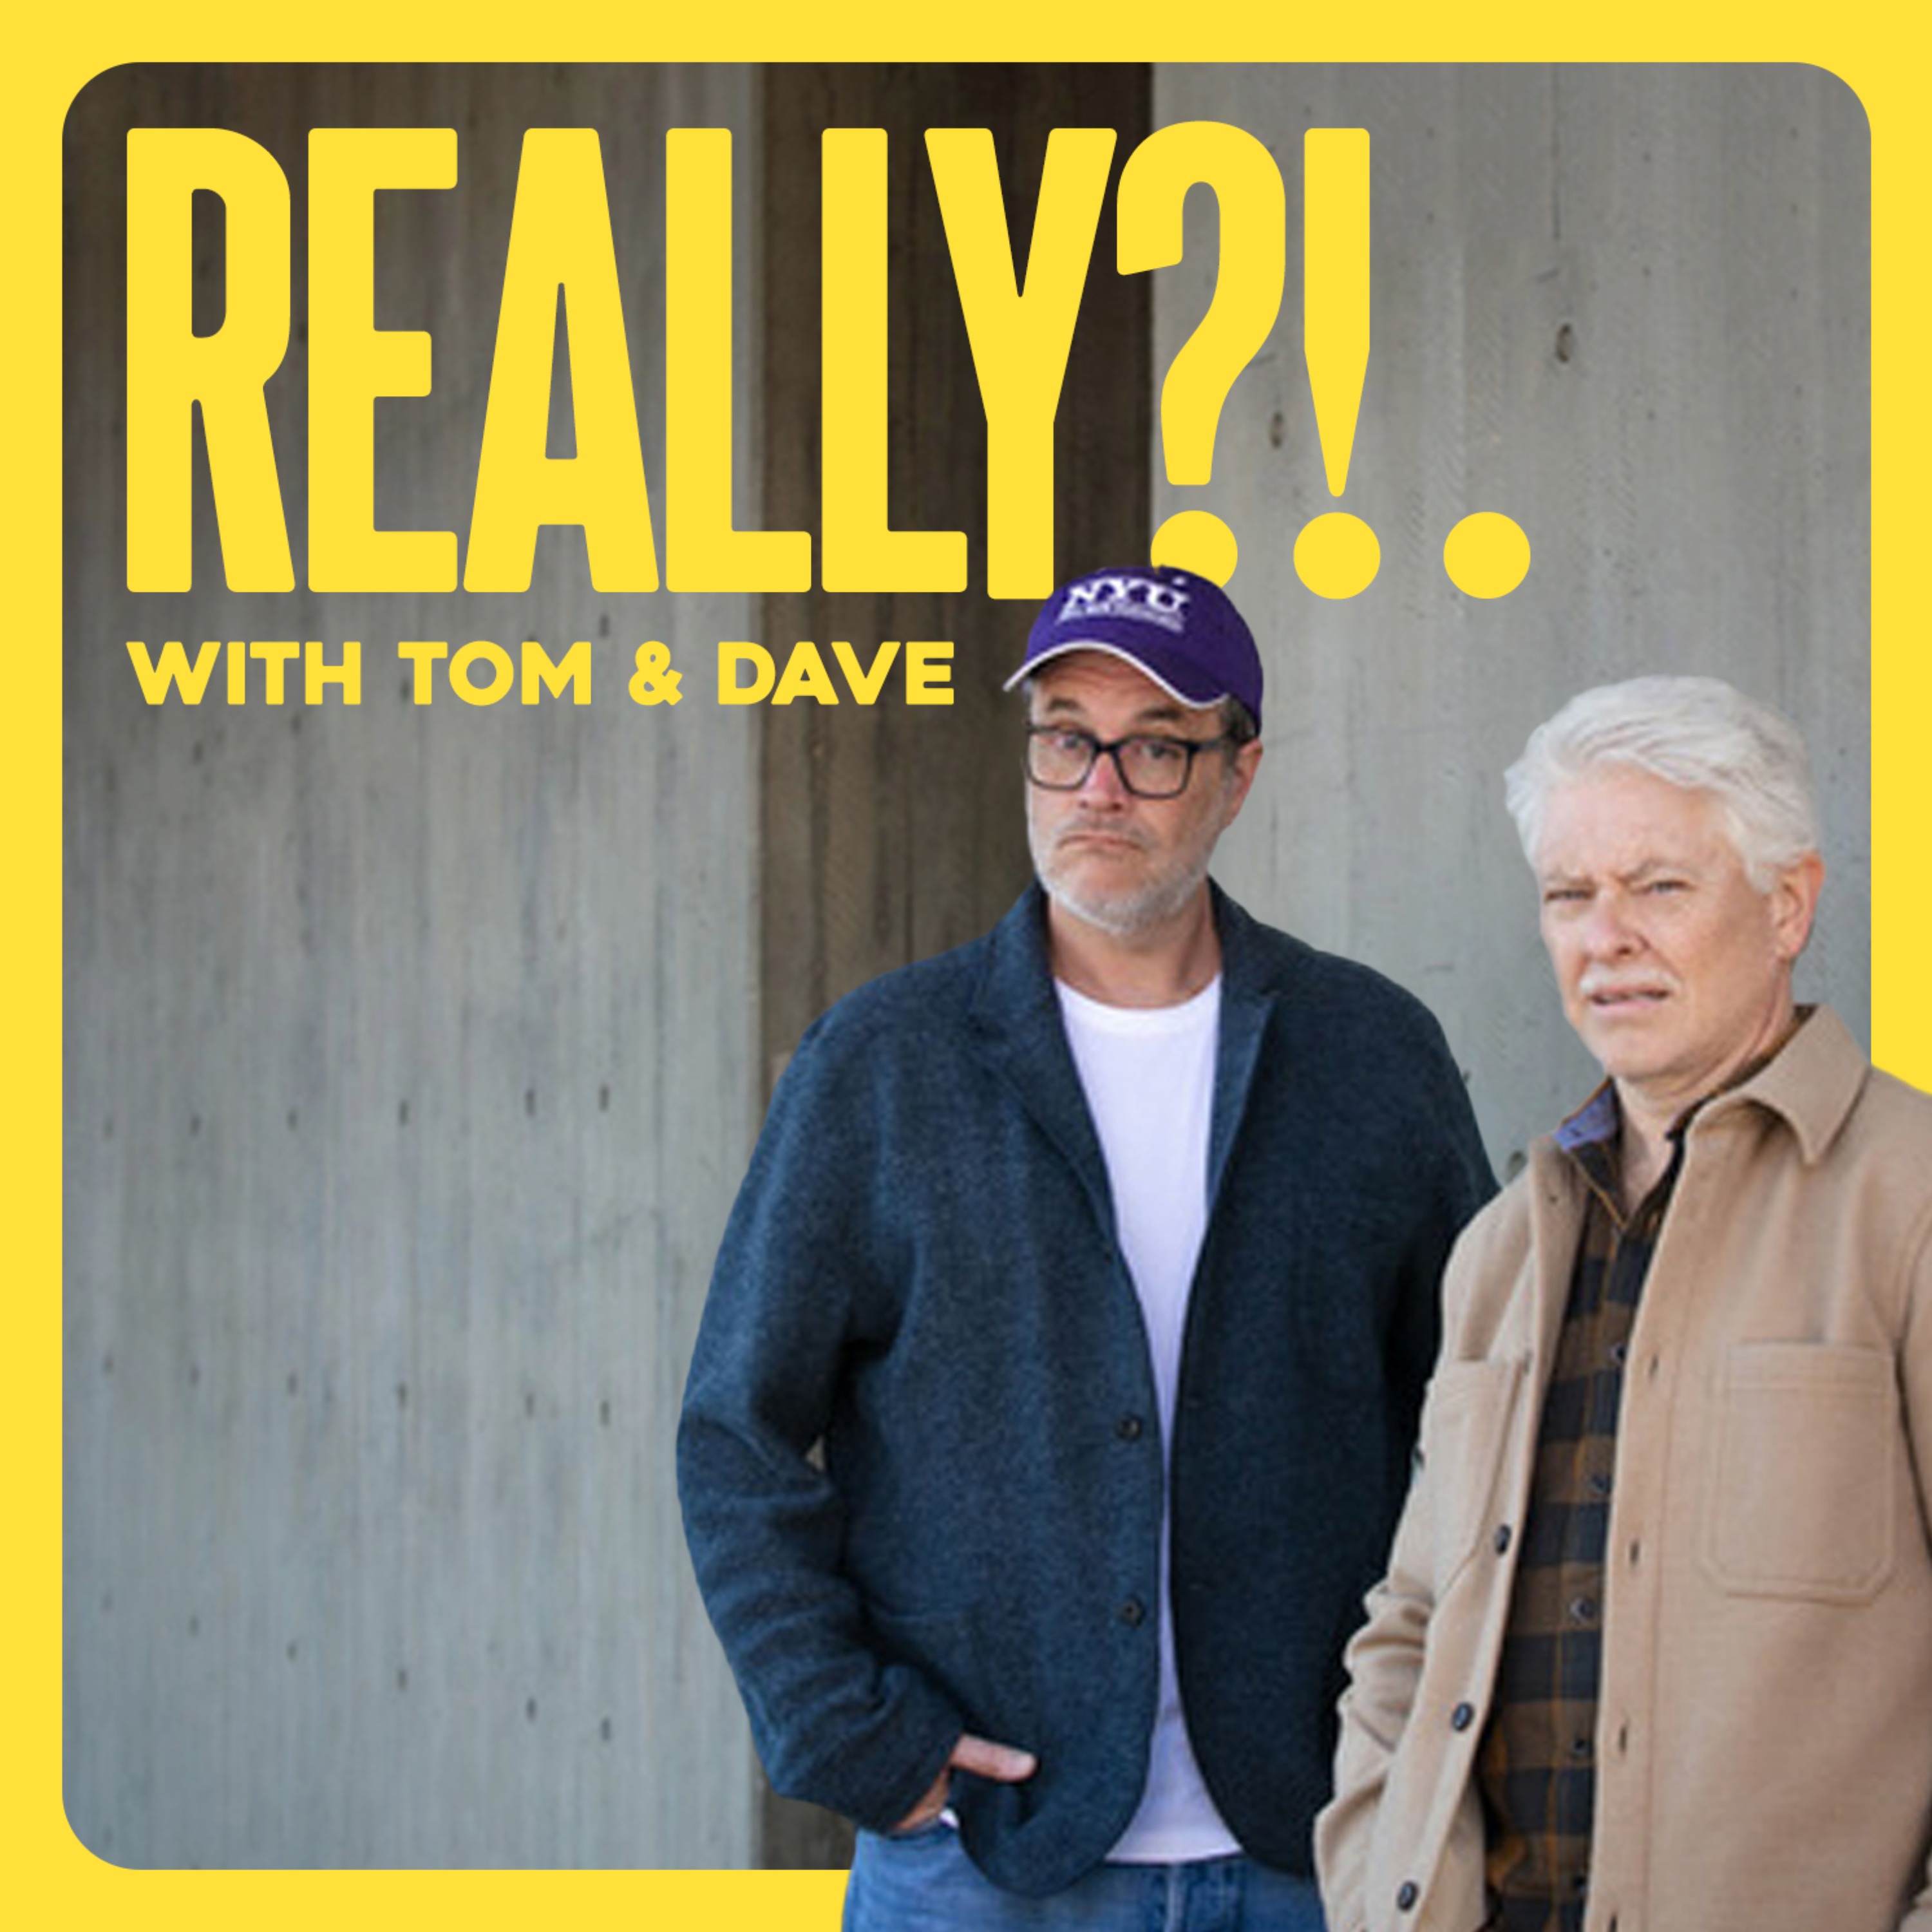 REALLY?!. with Tom and Dave:Tom Wheeler and Dave Foley